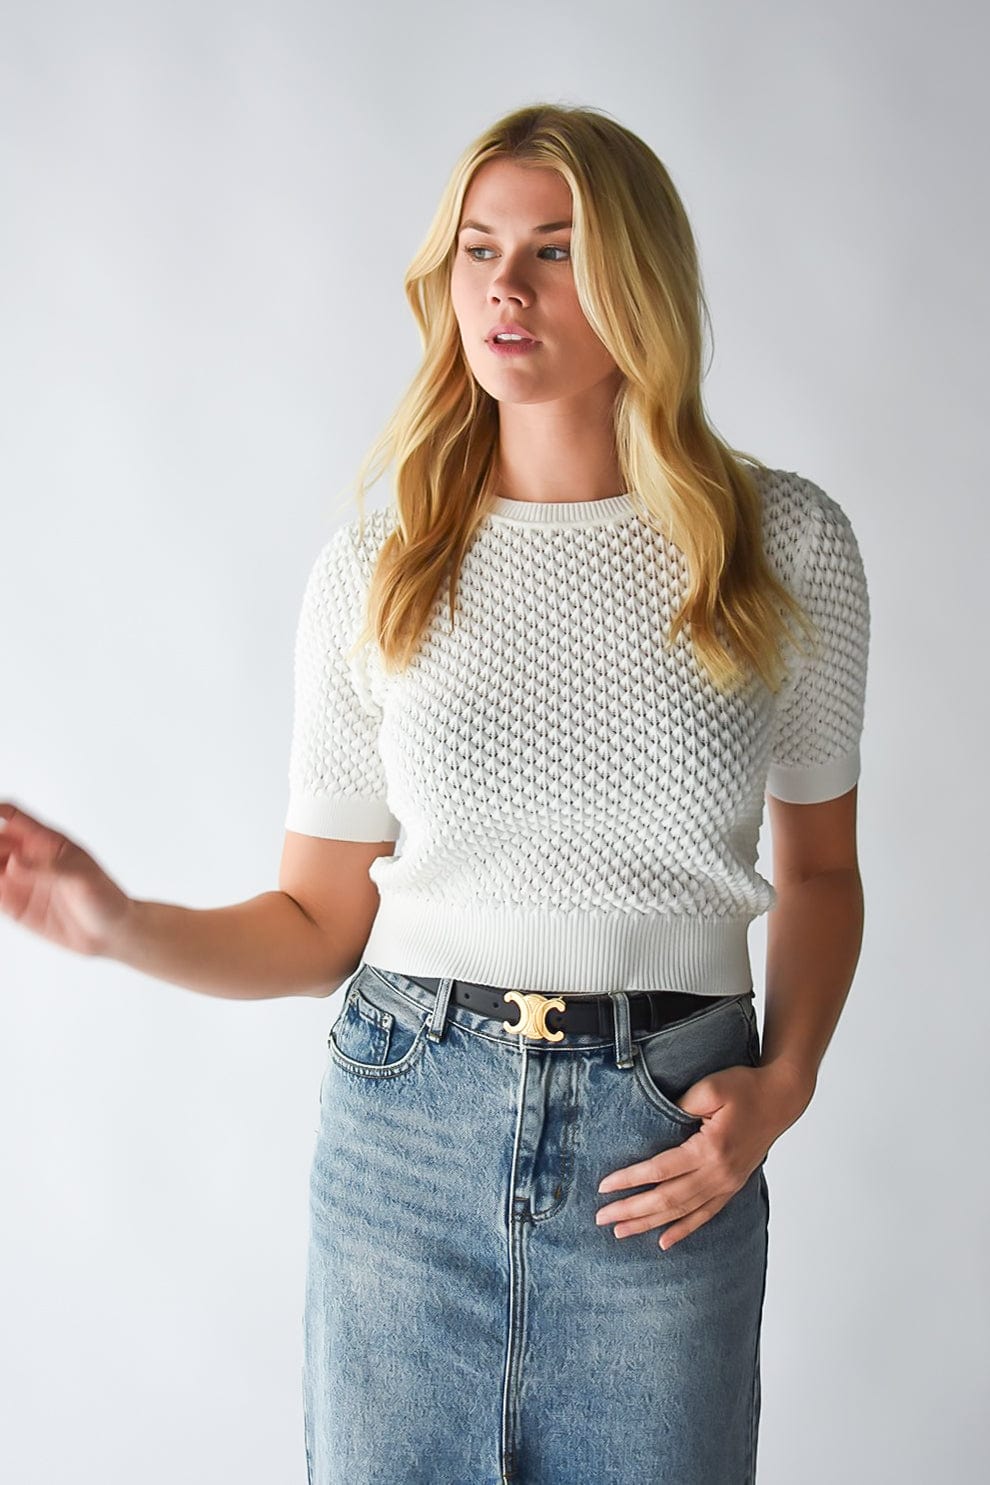 Lucy Paris Elise Knit Top in White